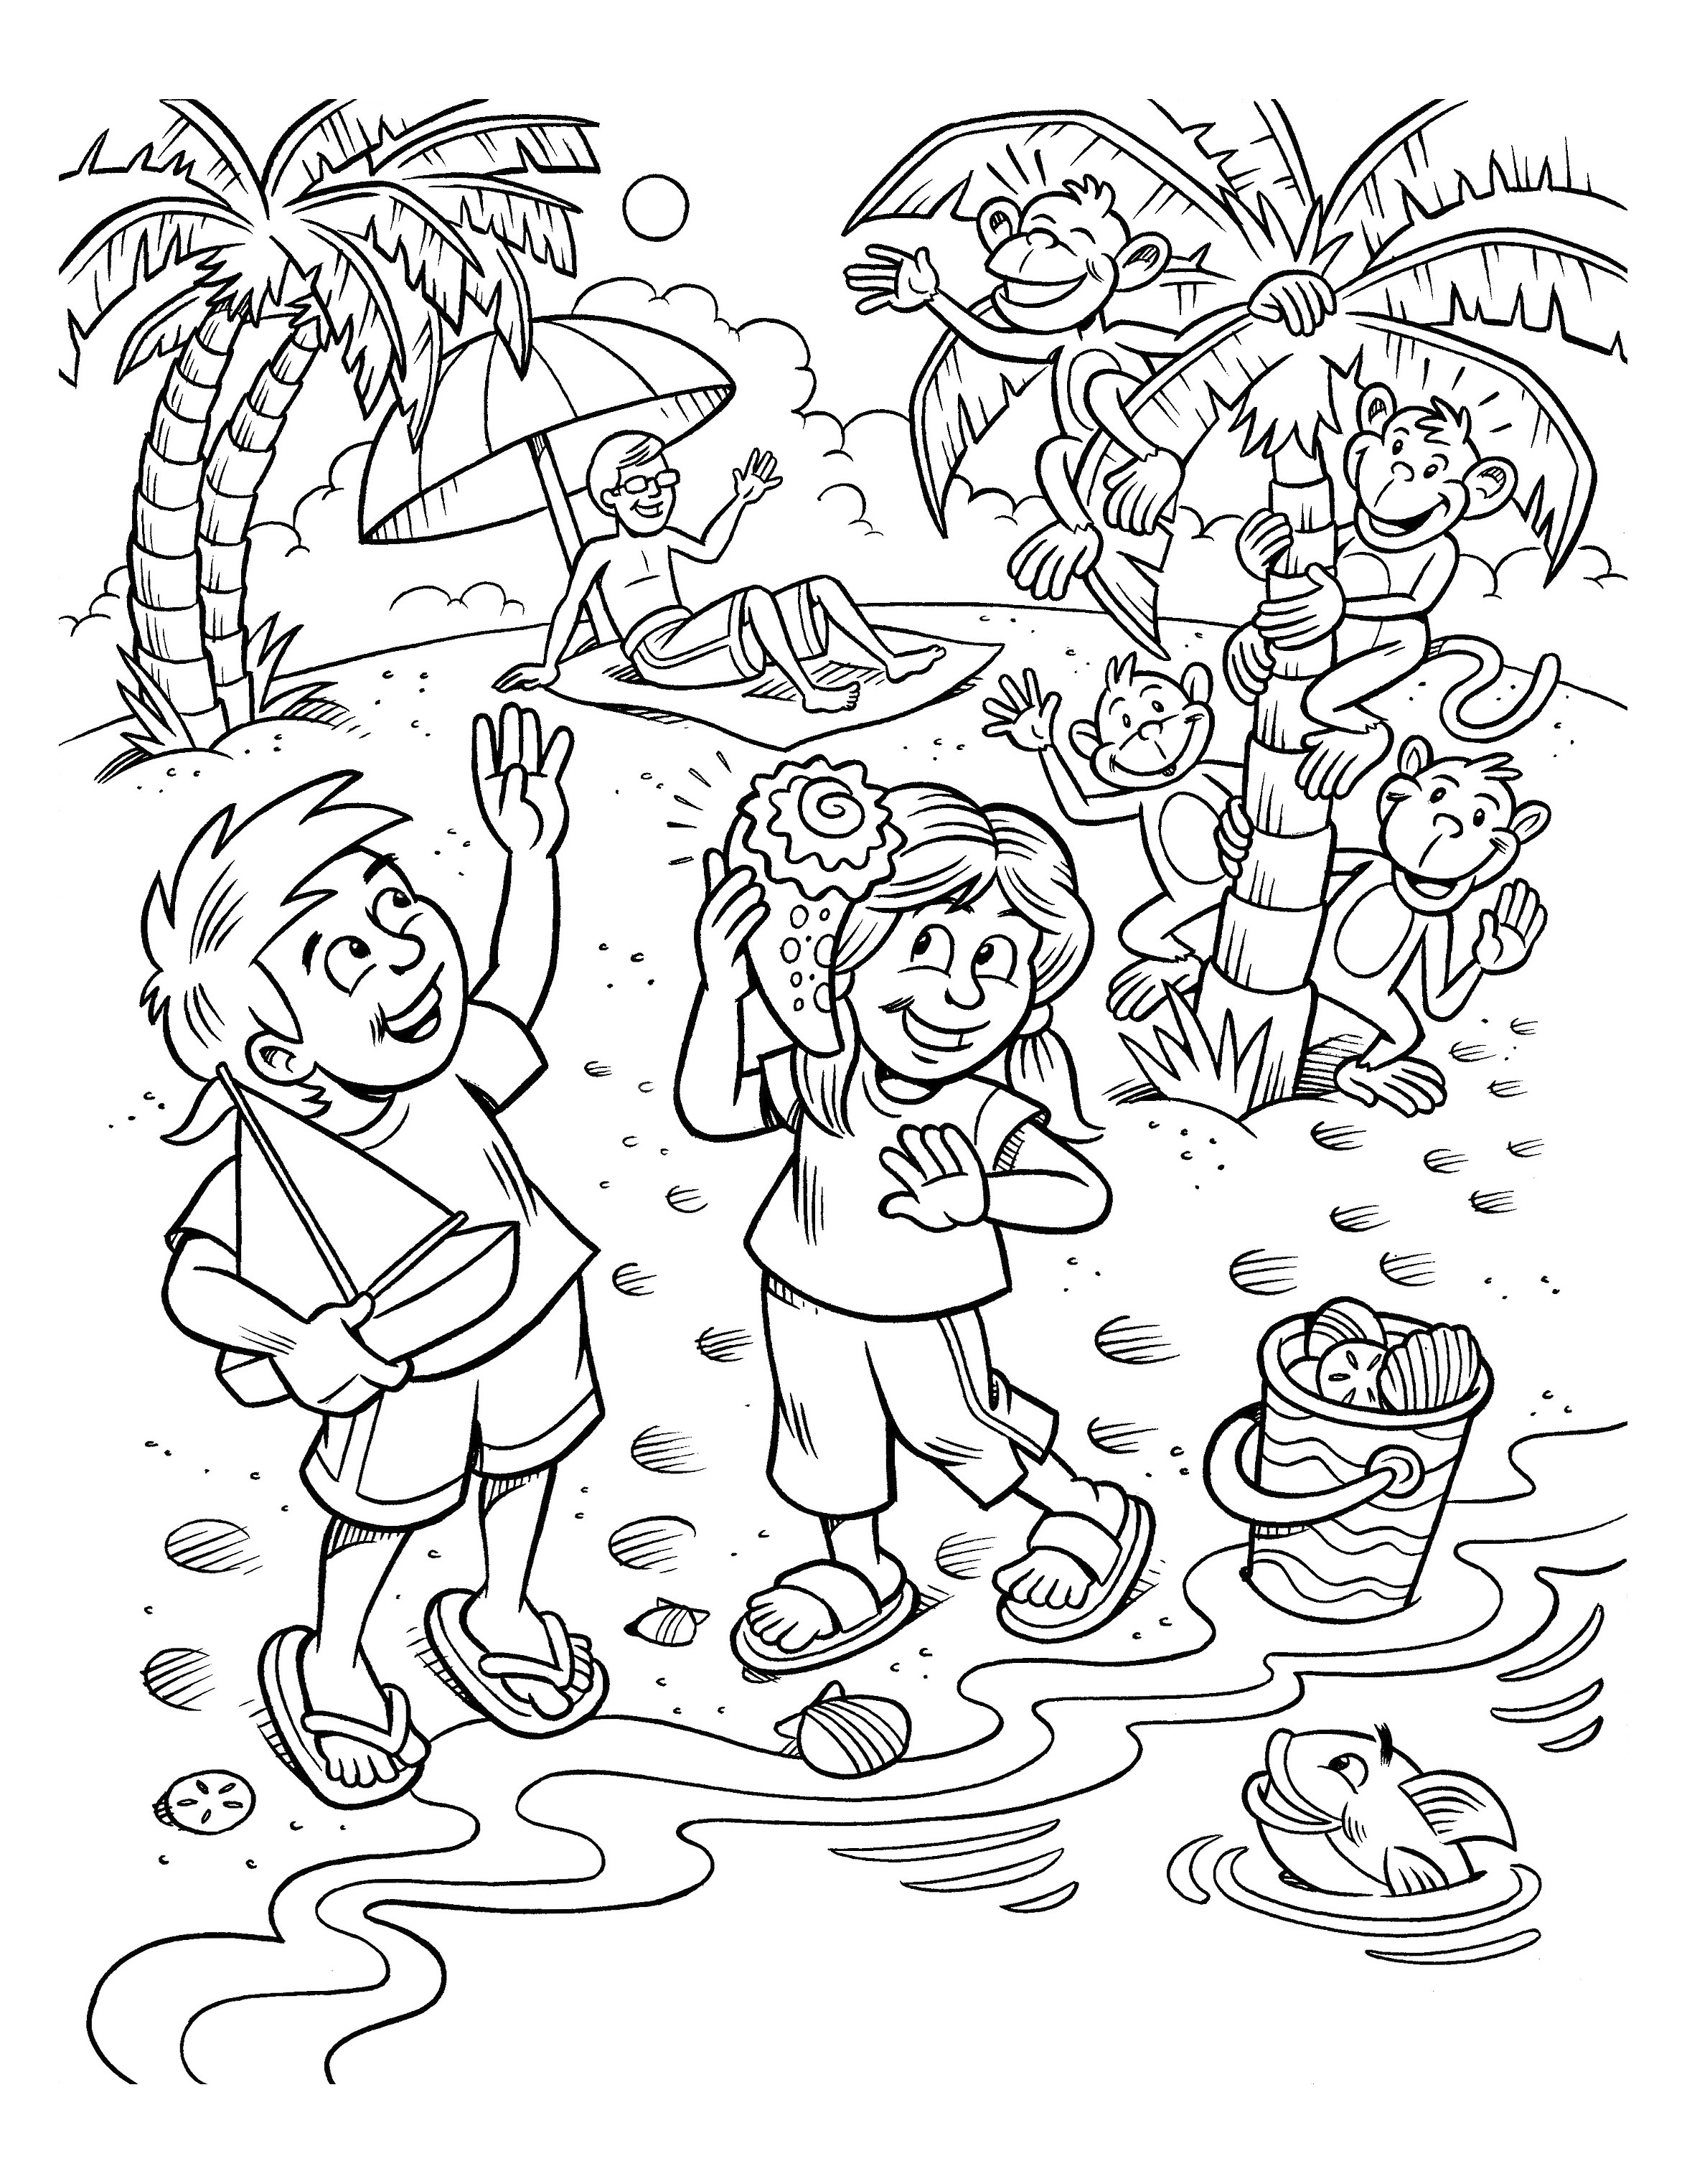 coloring_page_beach.jpeg